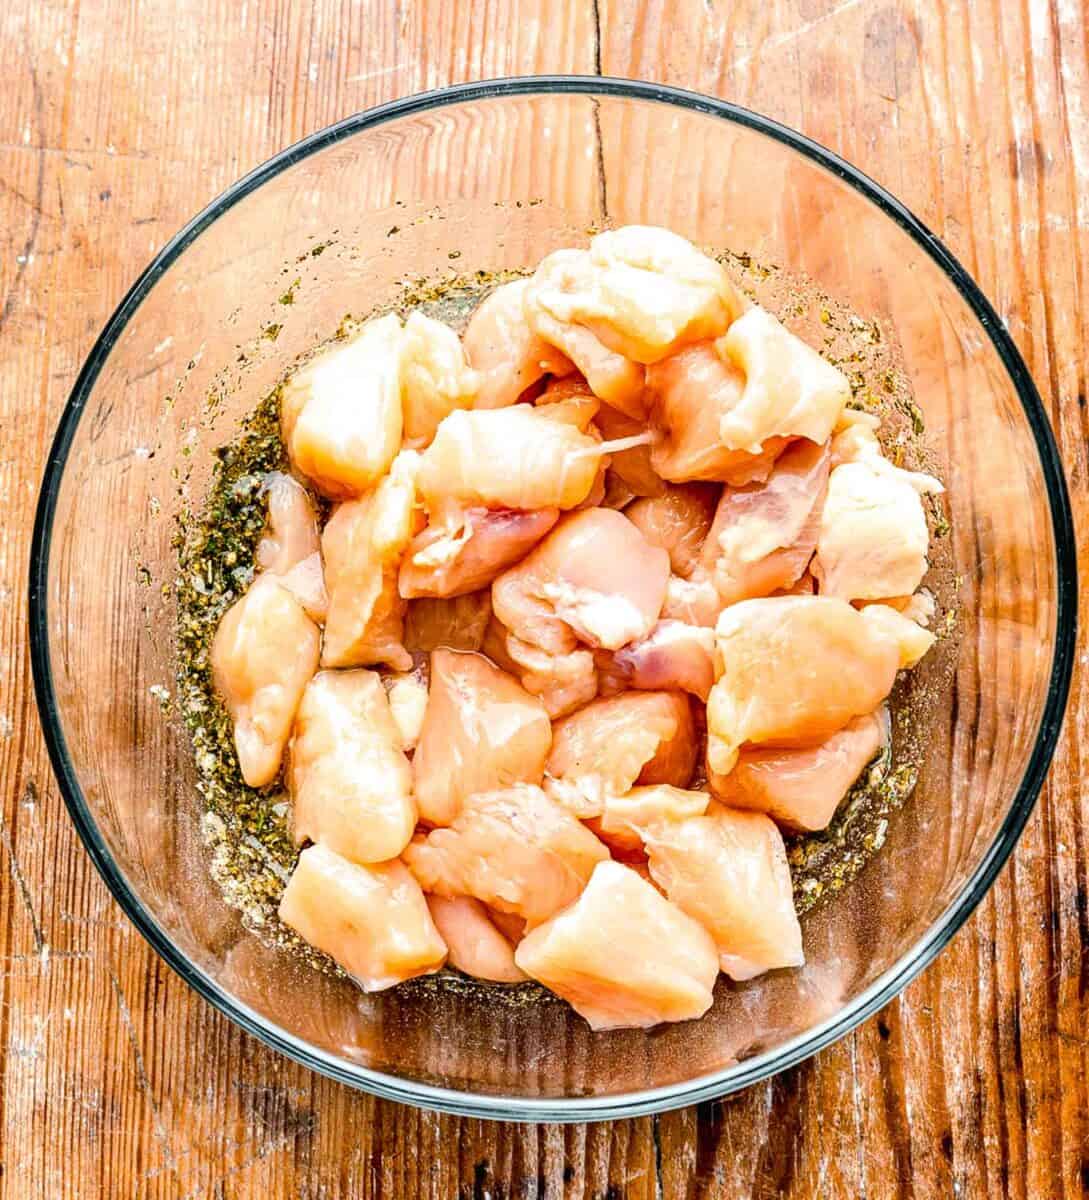 raw chicken added to the greek seasoning in the clear bowl